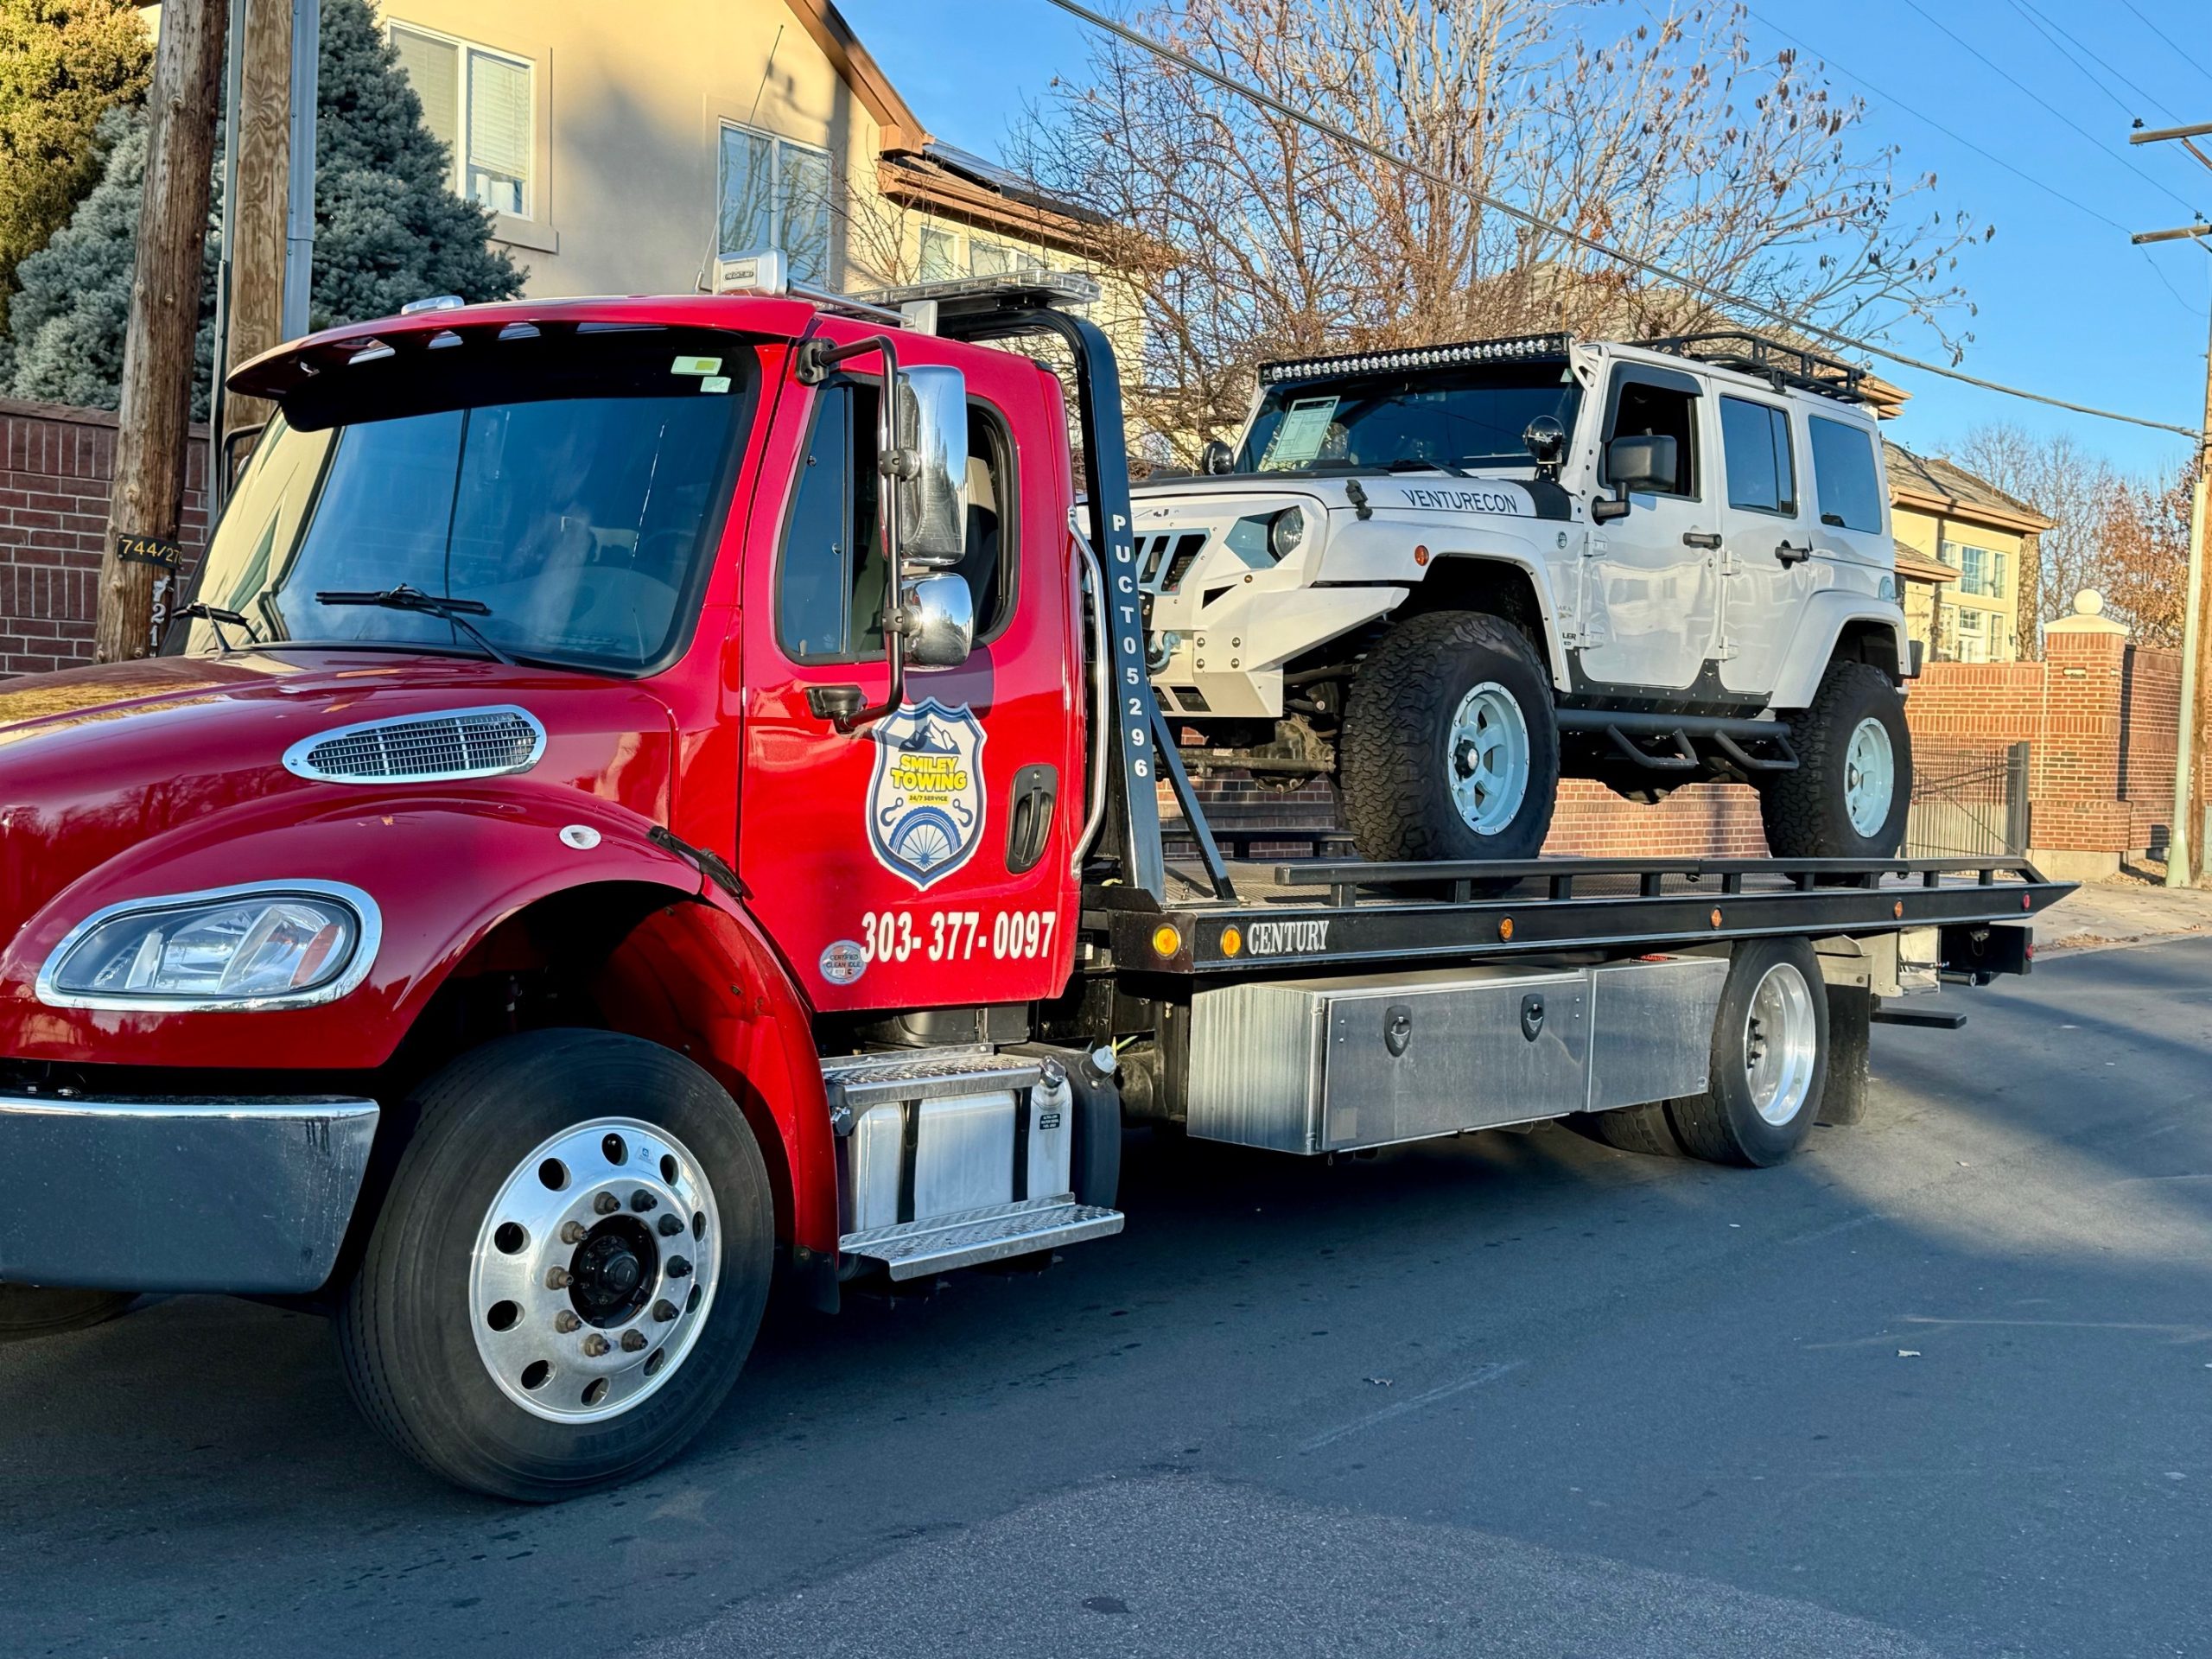 this image shows towing services in Aurora, CO